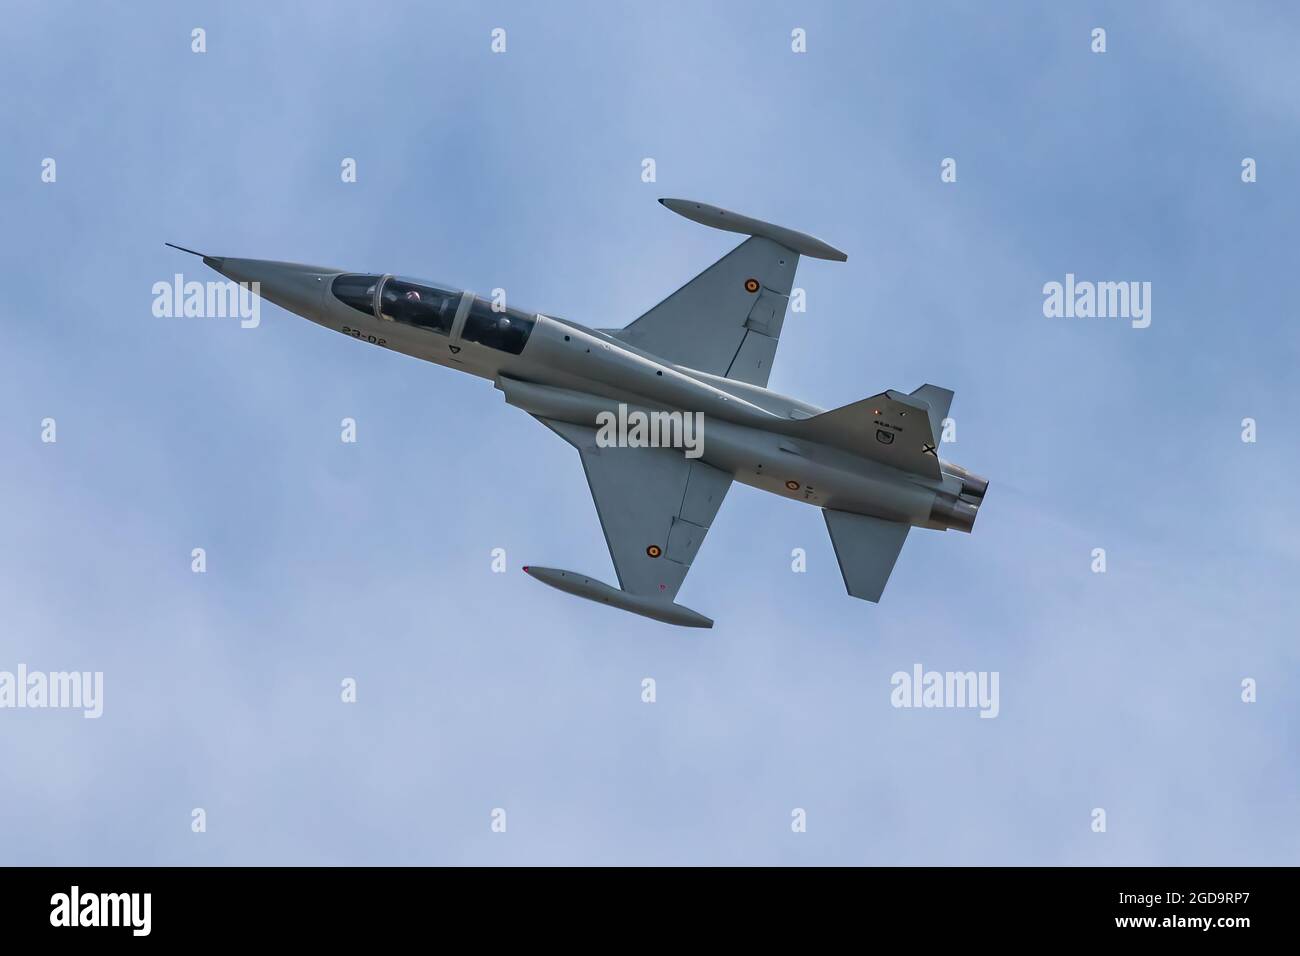 Seville, Spain - July 7, 2020: Northrop F-5M Freedom Fighter (AE-9) from 23 wing, Spanish Air Force Fighter jet plane on display in Seville, Spain Stock Photo